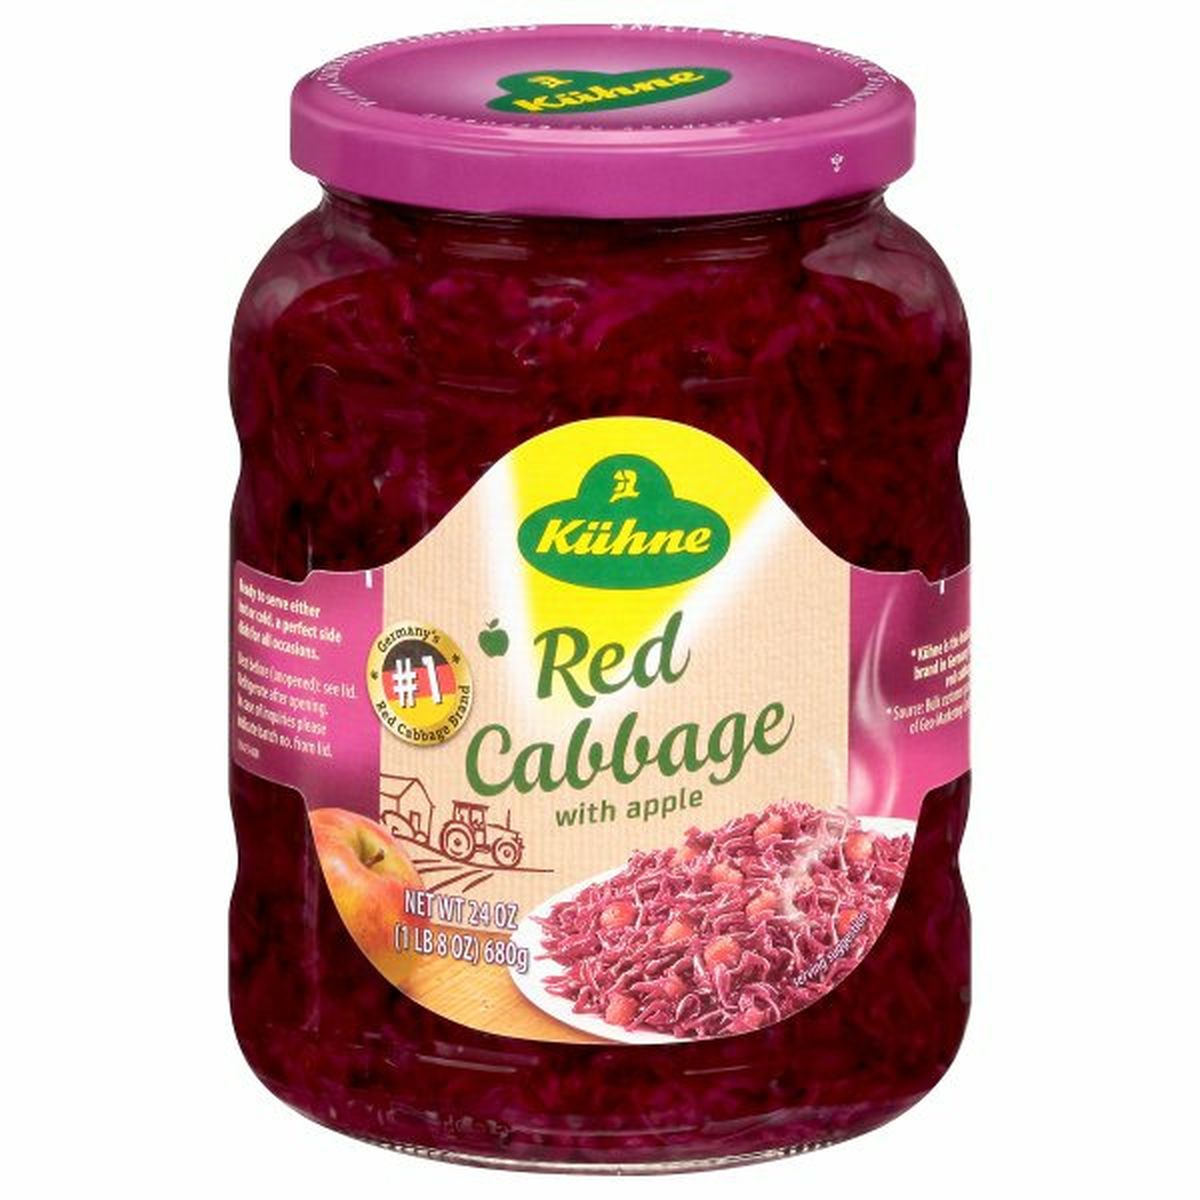 Calories in KÃ¼hne Red Cabbage with Apple